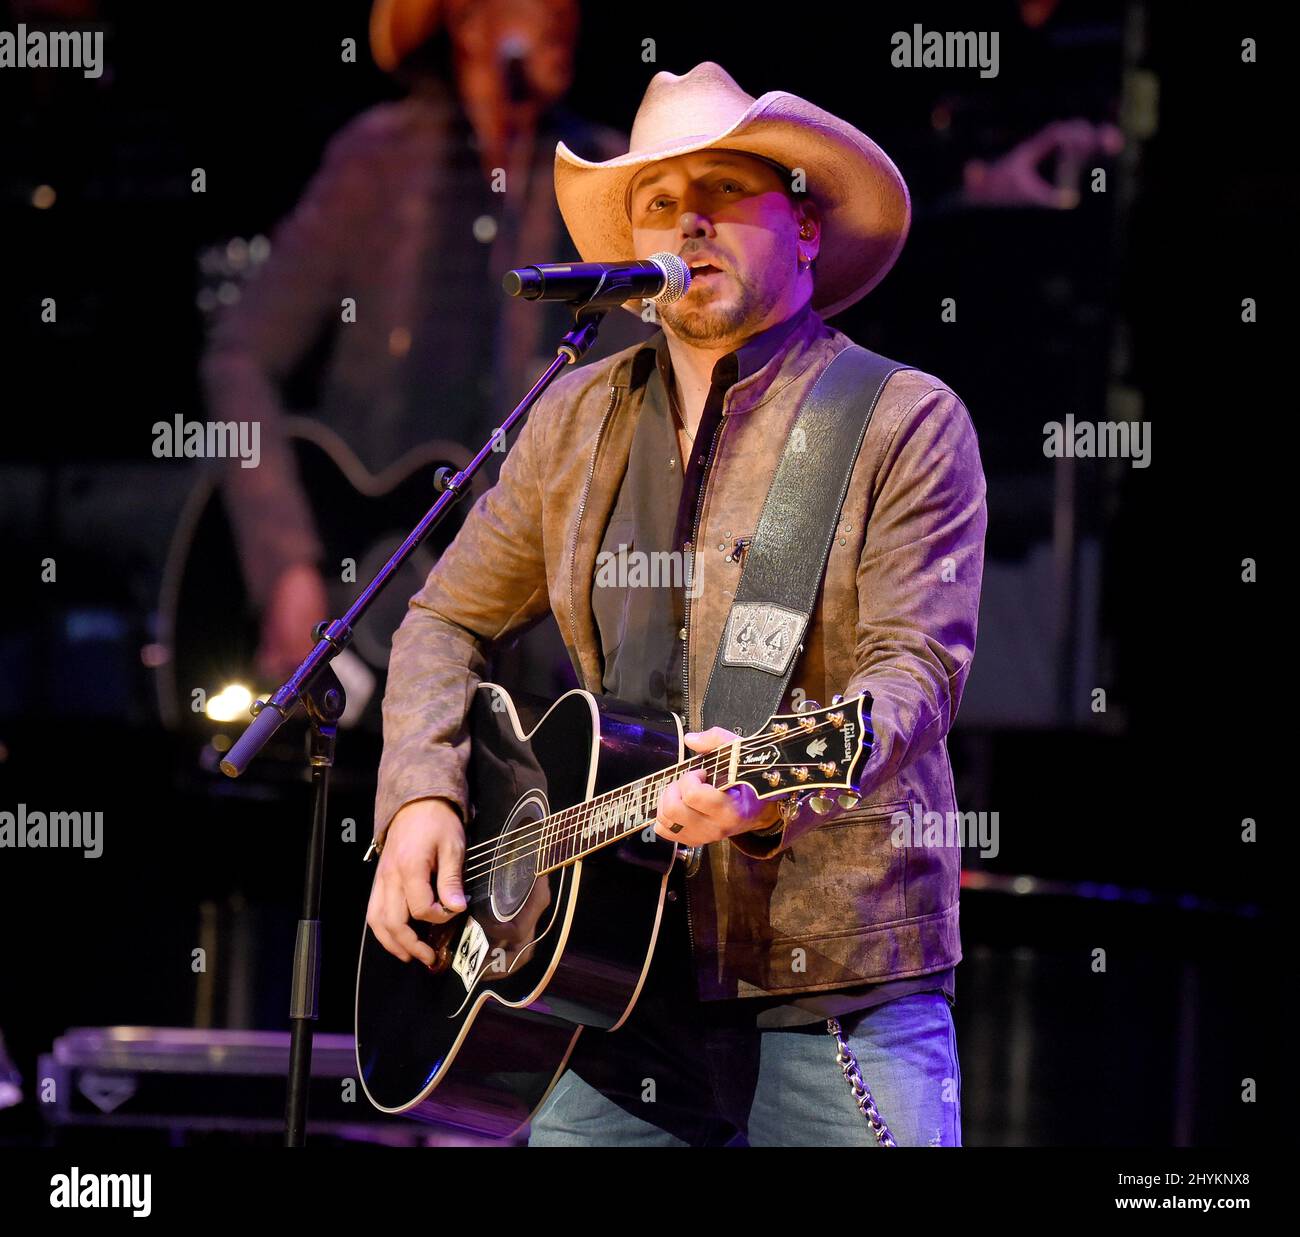 Jason Aldean attending the 2019 Musicians Hall of Fame Ceremony and Induction Concert held at the Schermerhorn Symphony Center in Nashville, TN. Stock Photo